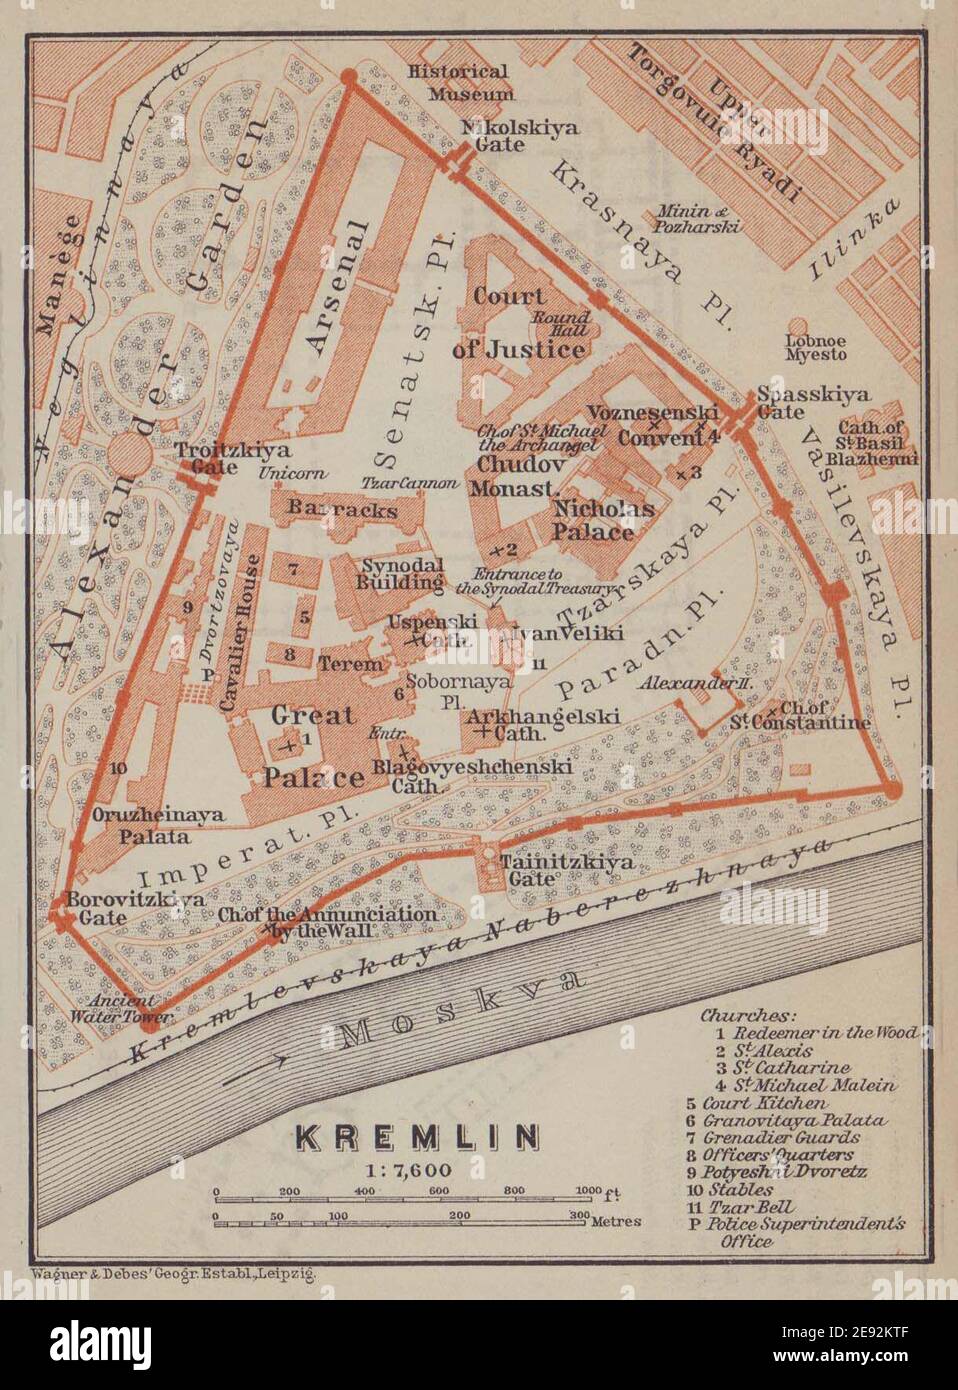 Kremlin ground/floor plan. Moscow, Russia. BAEDEKER 1914 old antique map chart Stock Photo